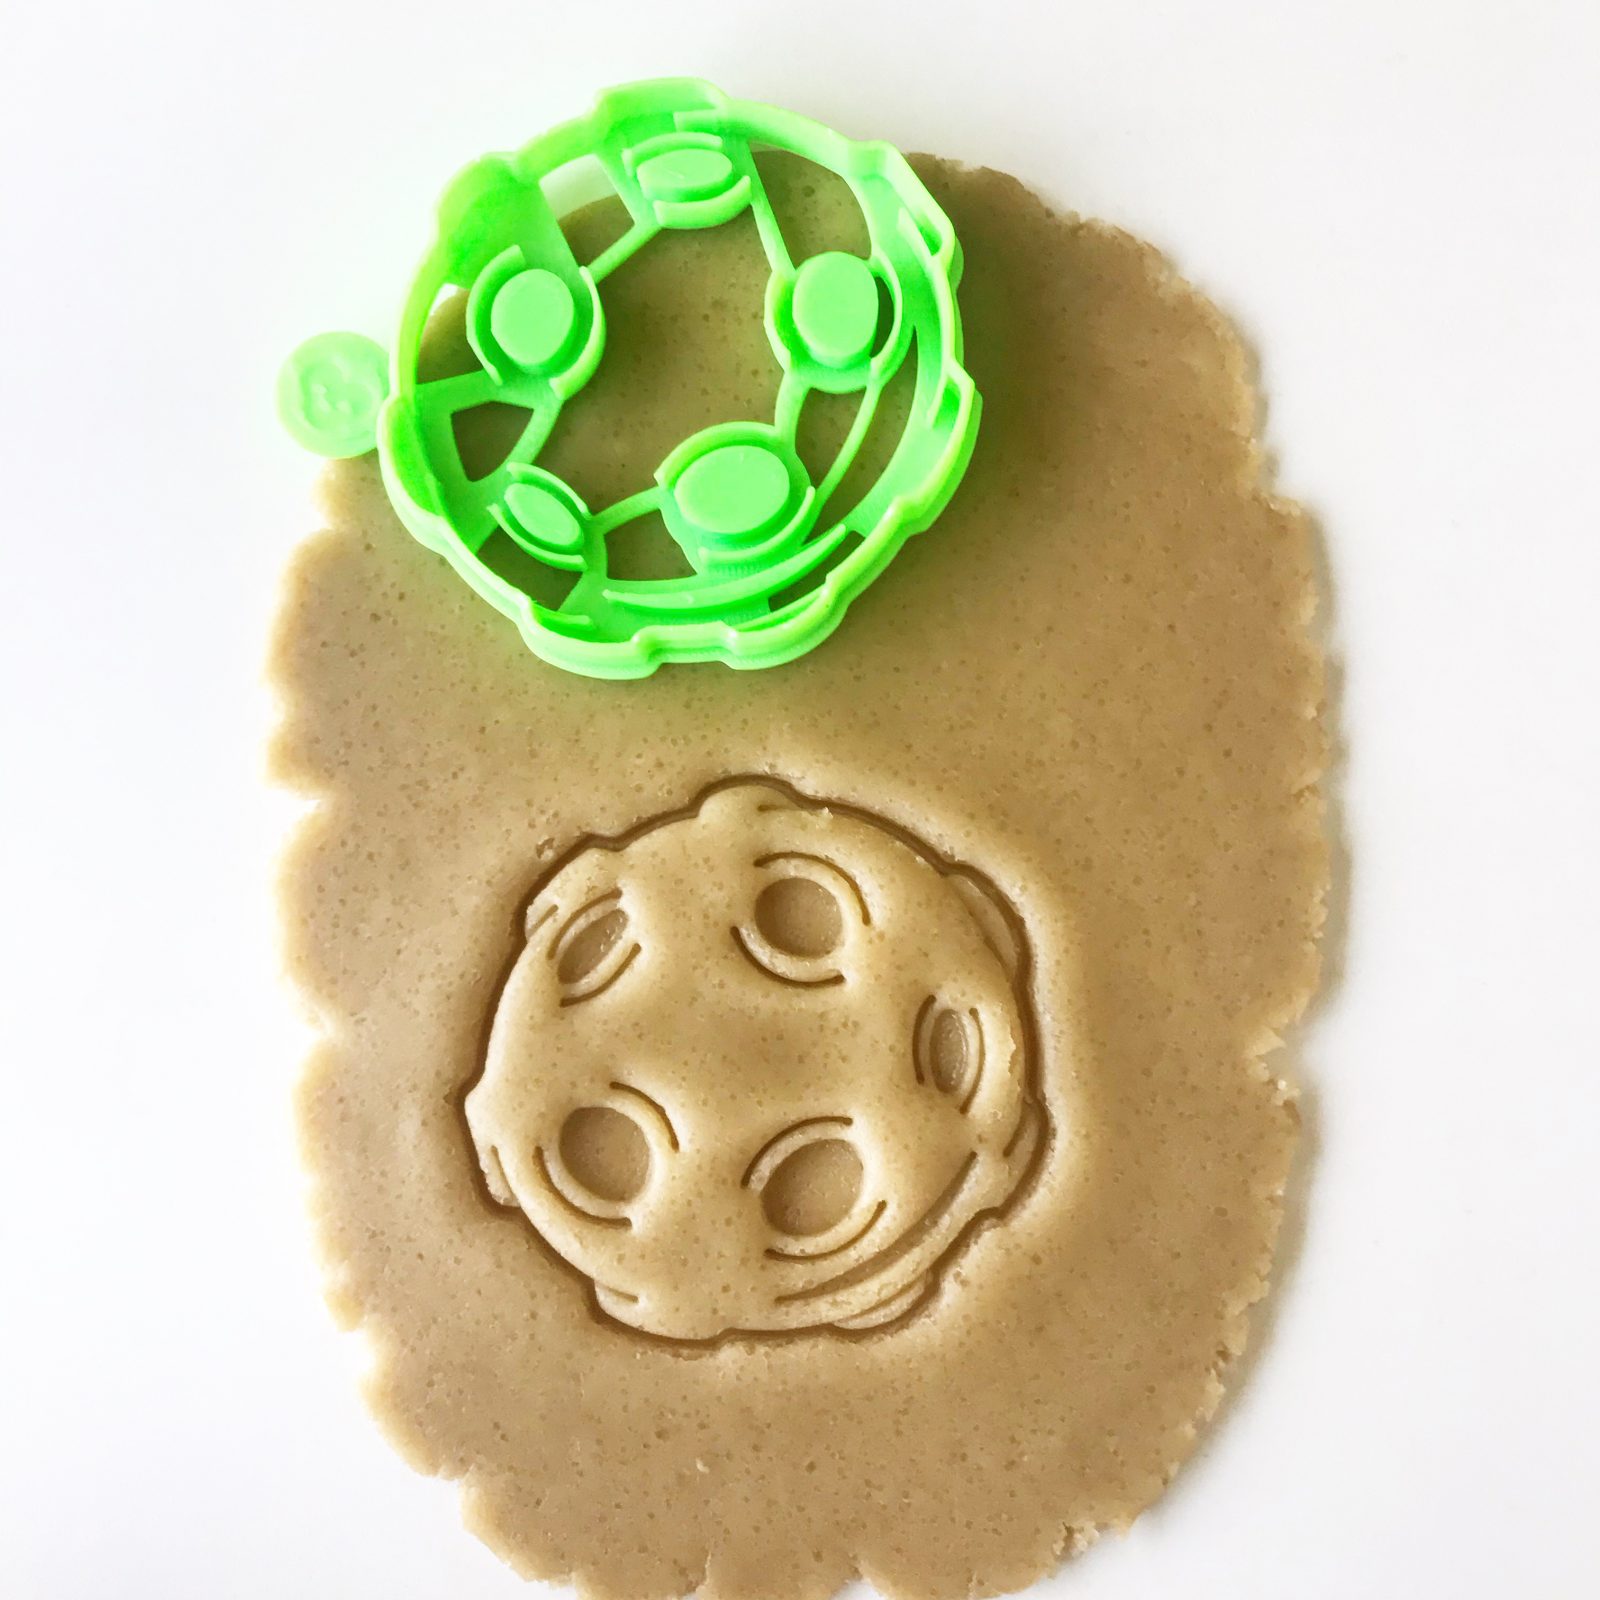 Asteroid Cookie Cutter